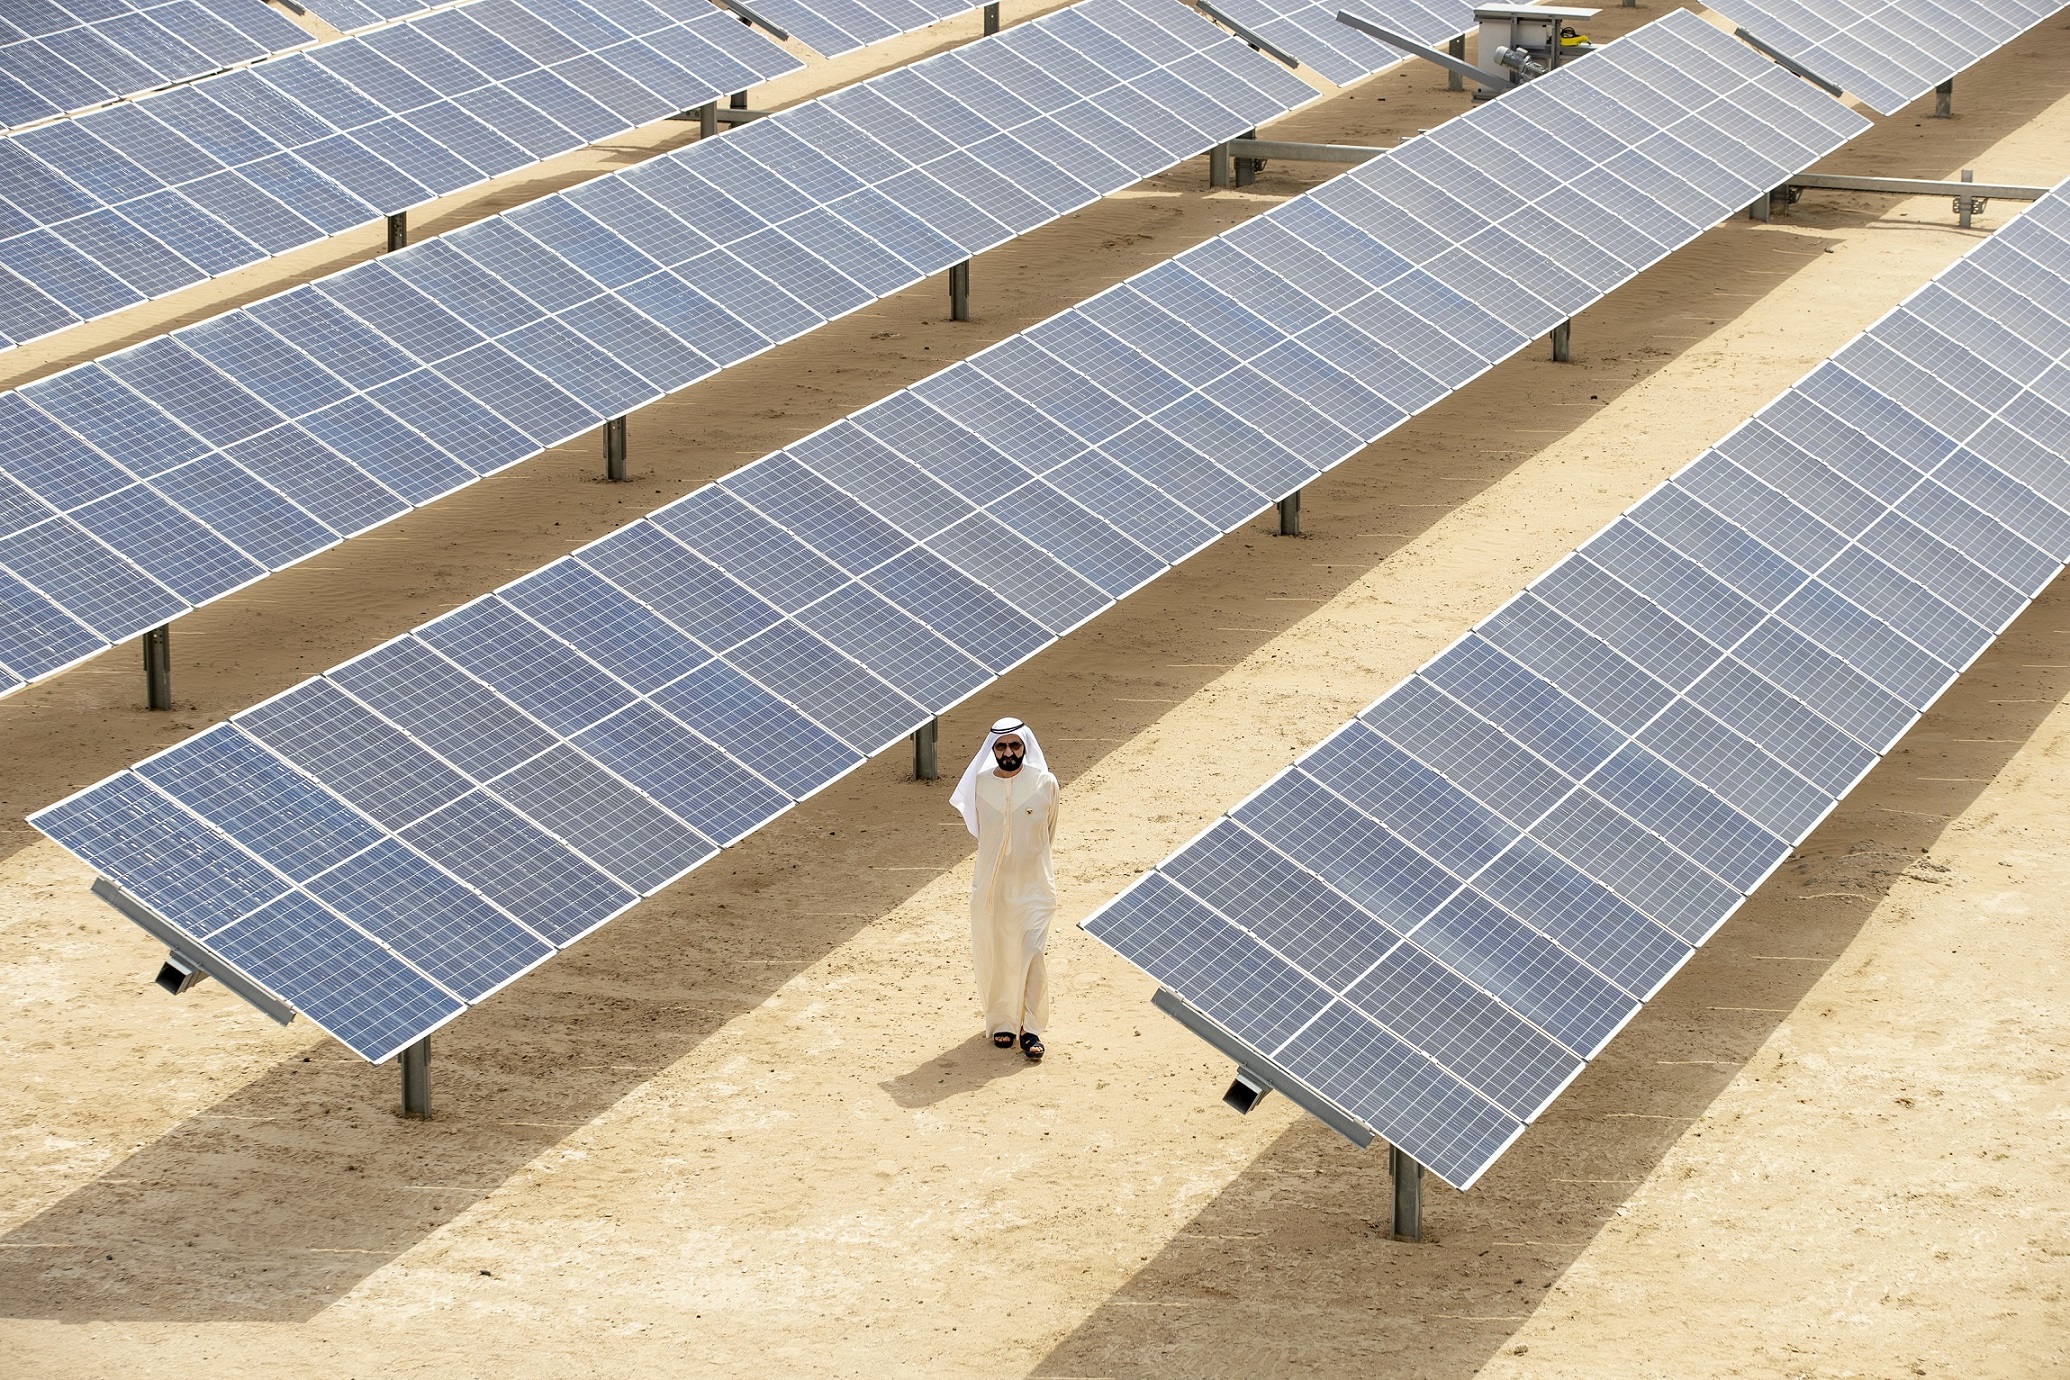 Image for UAE Vice President Inaugurates 800MW 3rd Phase Of The World’s Largest Single-Site Solar Park